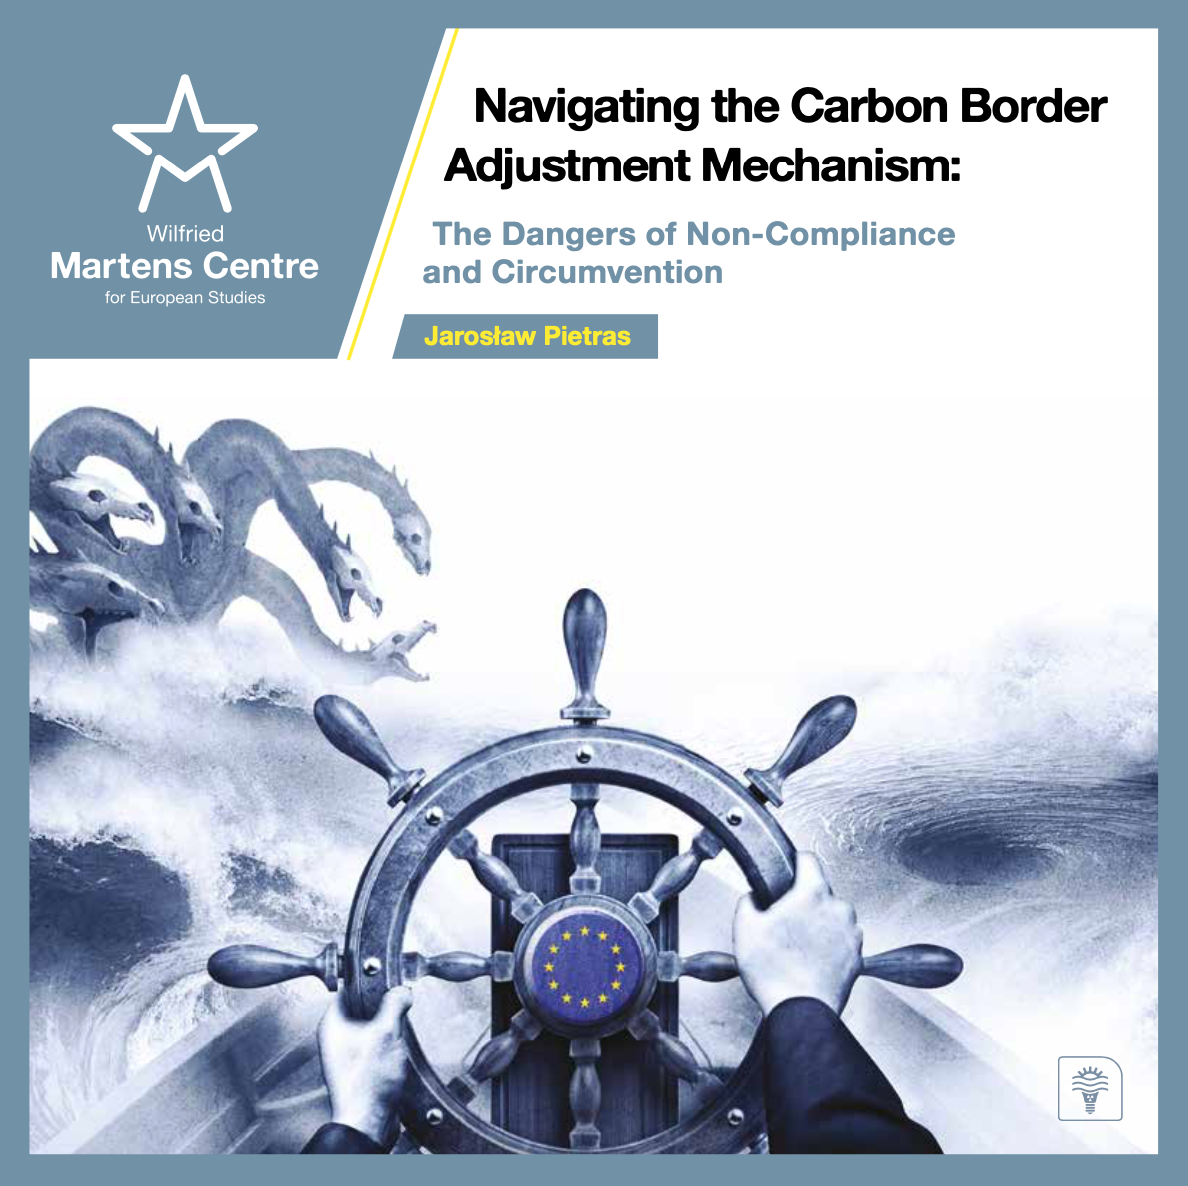 Navigating the Carbon Border Adjustment Mechanism: The Dangers of Non-Compliance and Circumvention